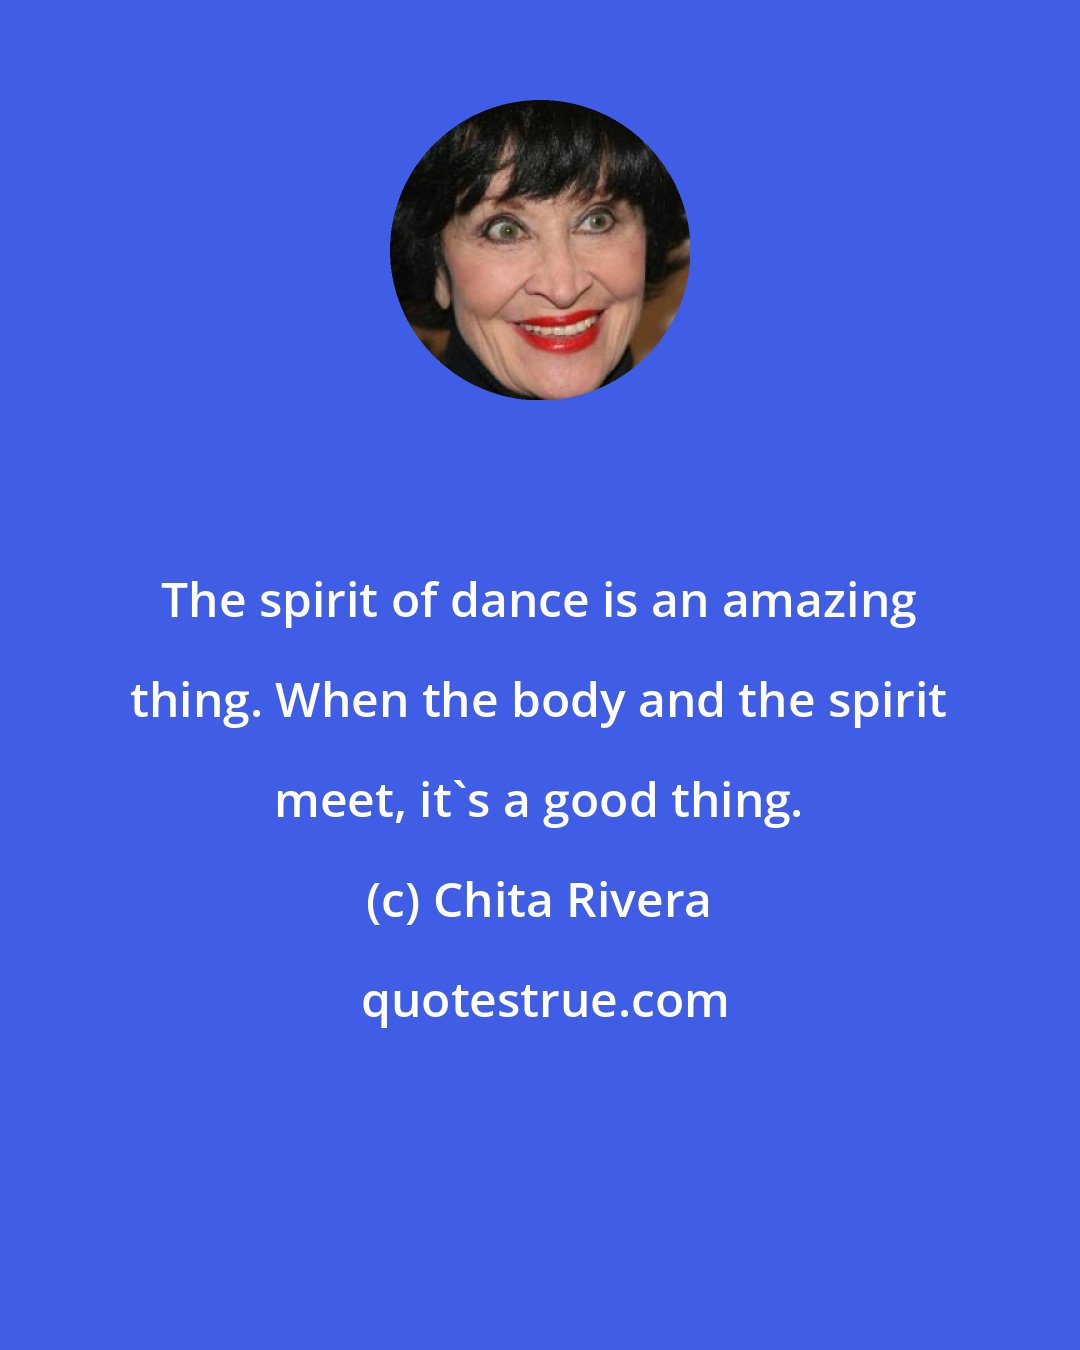 Chita Rivera: The spirit of dance is an amazing thing. When the body and the spirit meet, it's a good thing.